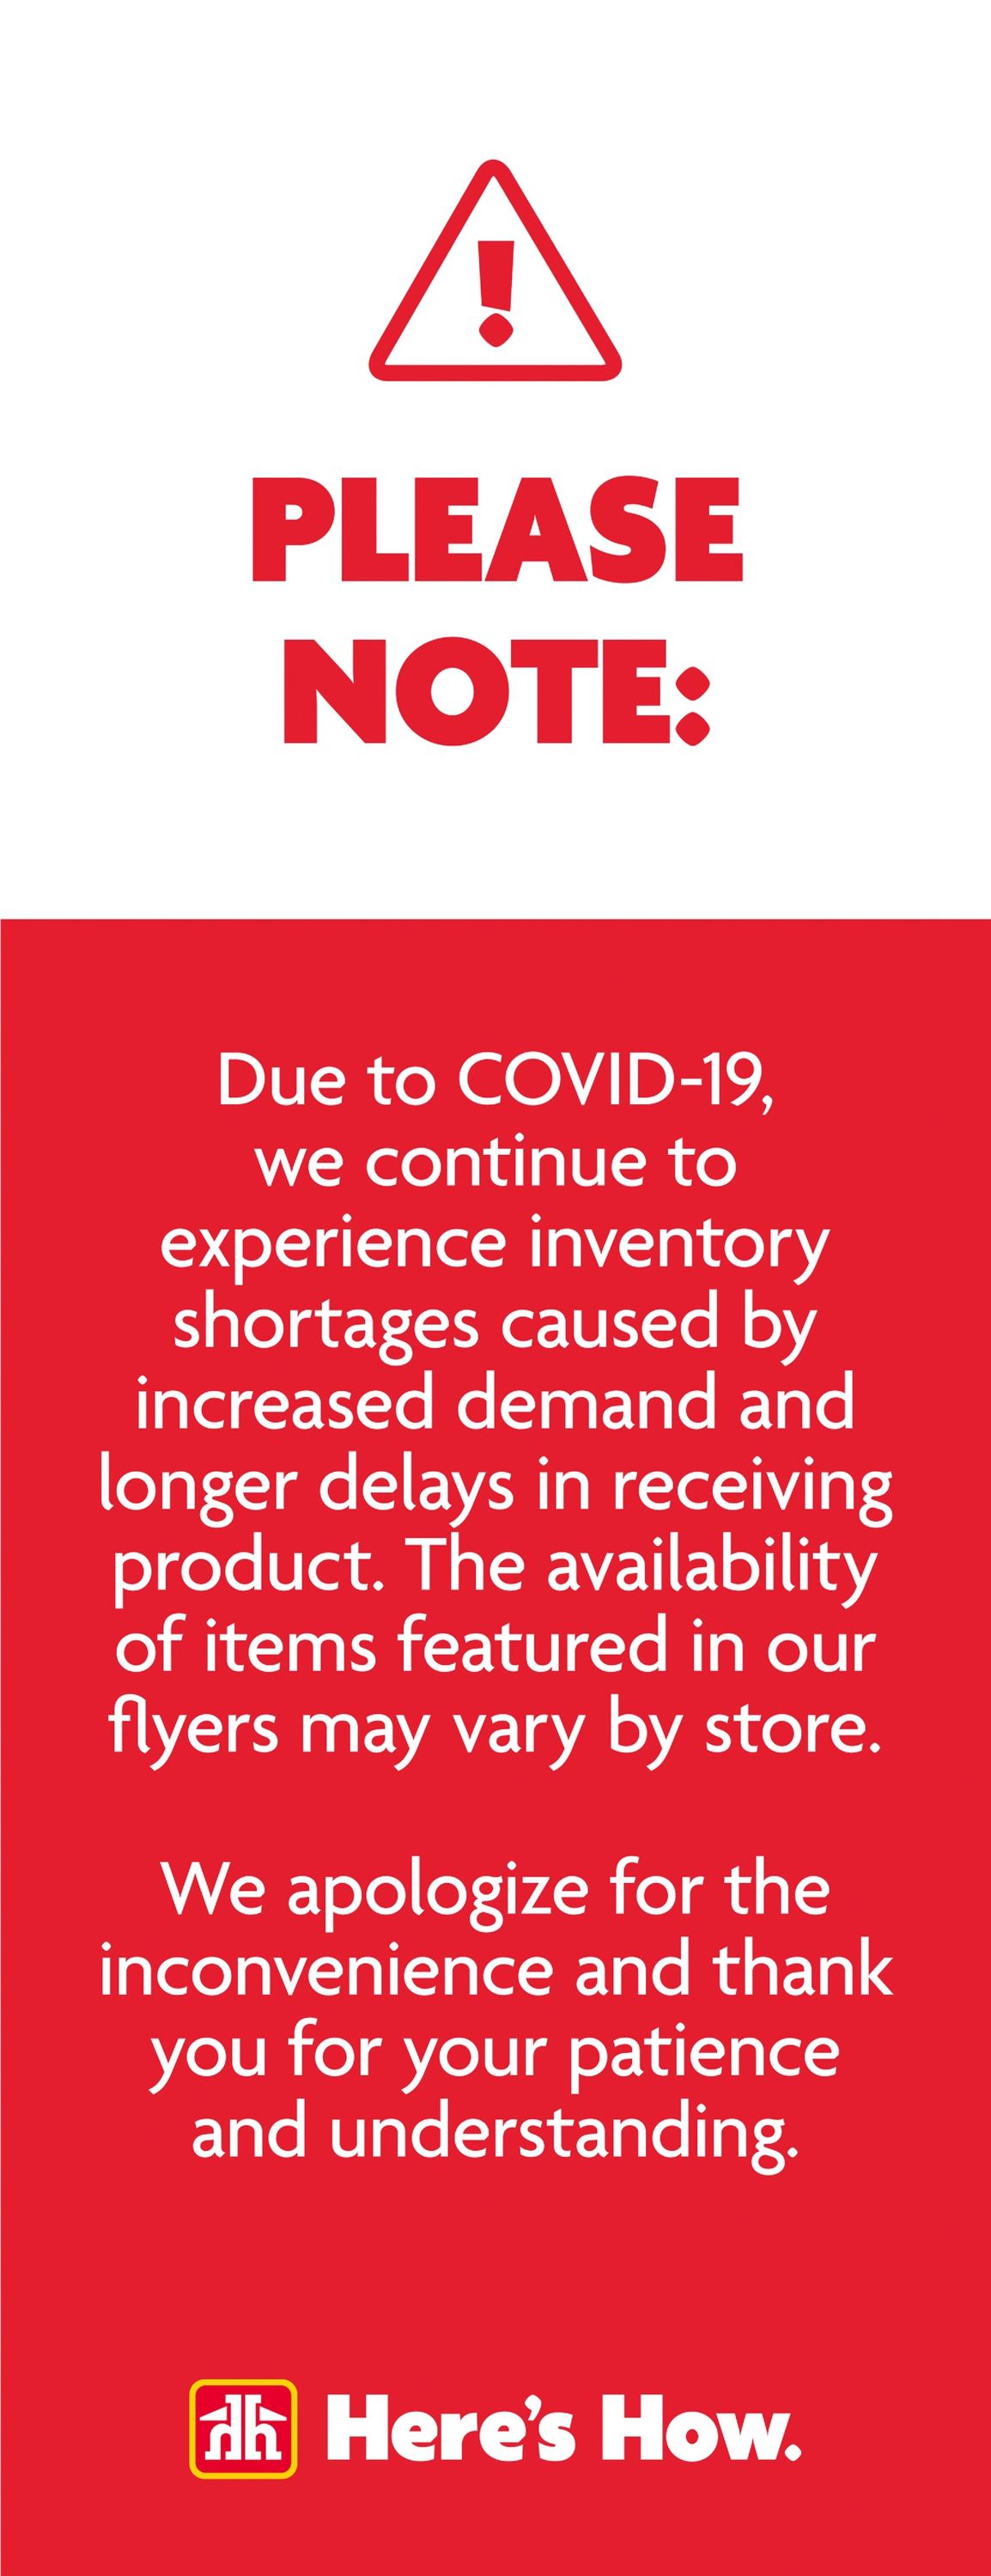 Home Hardware Flyer from 04/29/2021